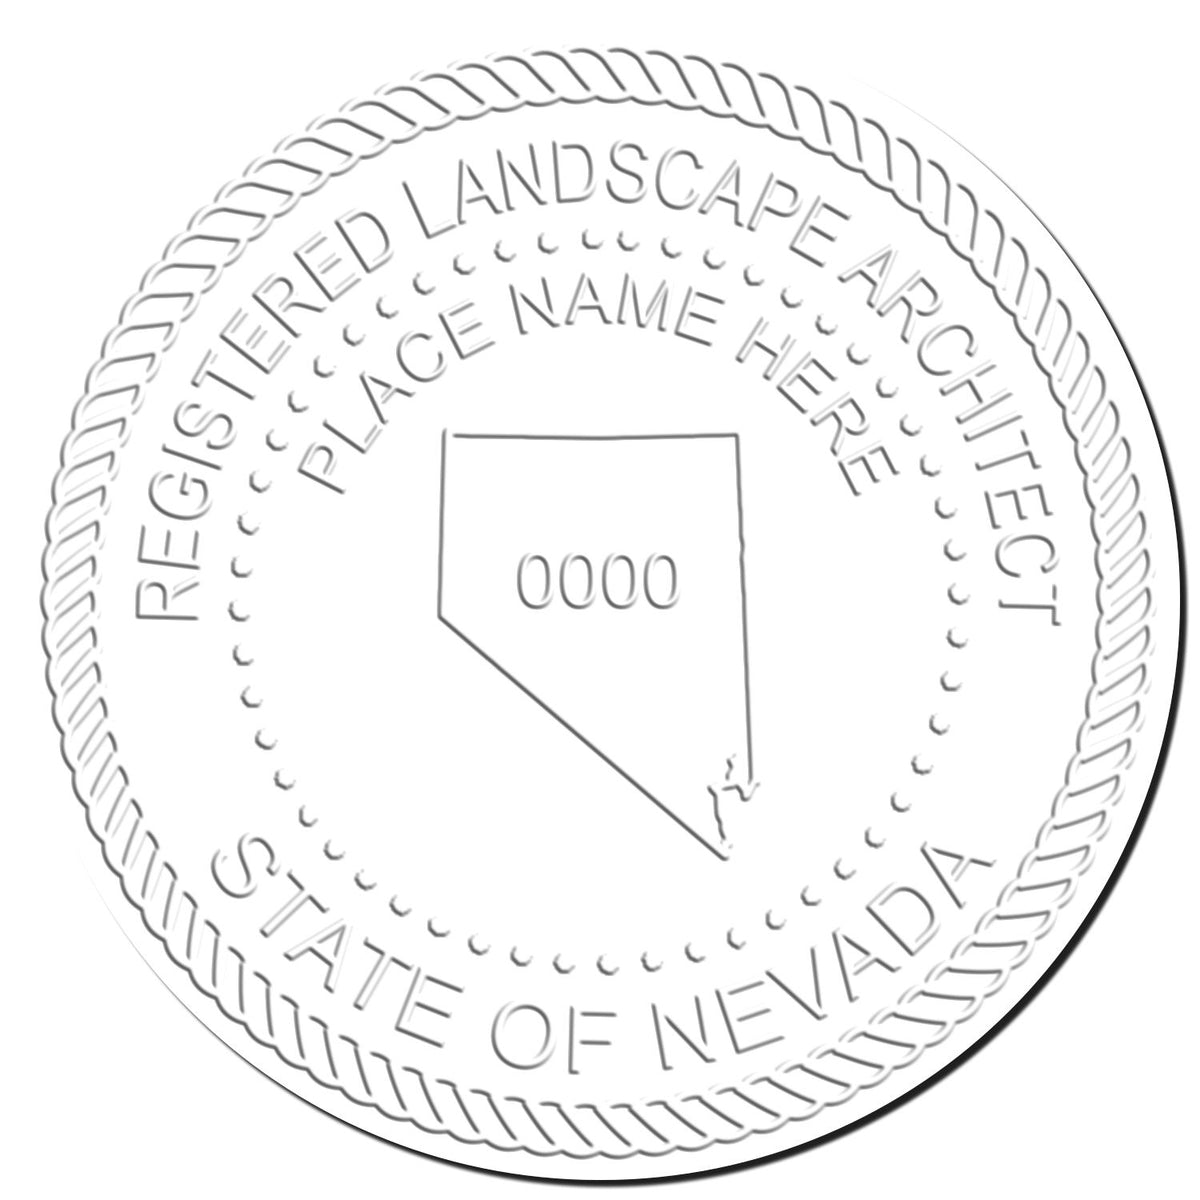 This paper is stamped with a sample imprint of the Gift Nevada Landscape Architect Seal, signifying its quality and reliability.